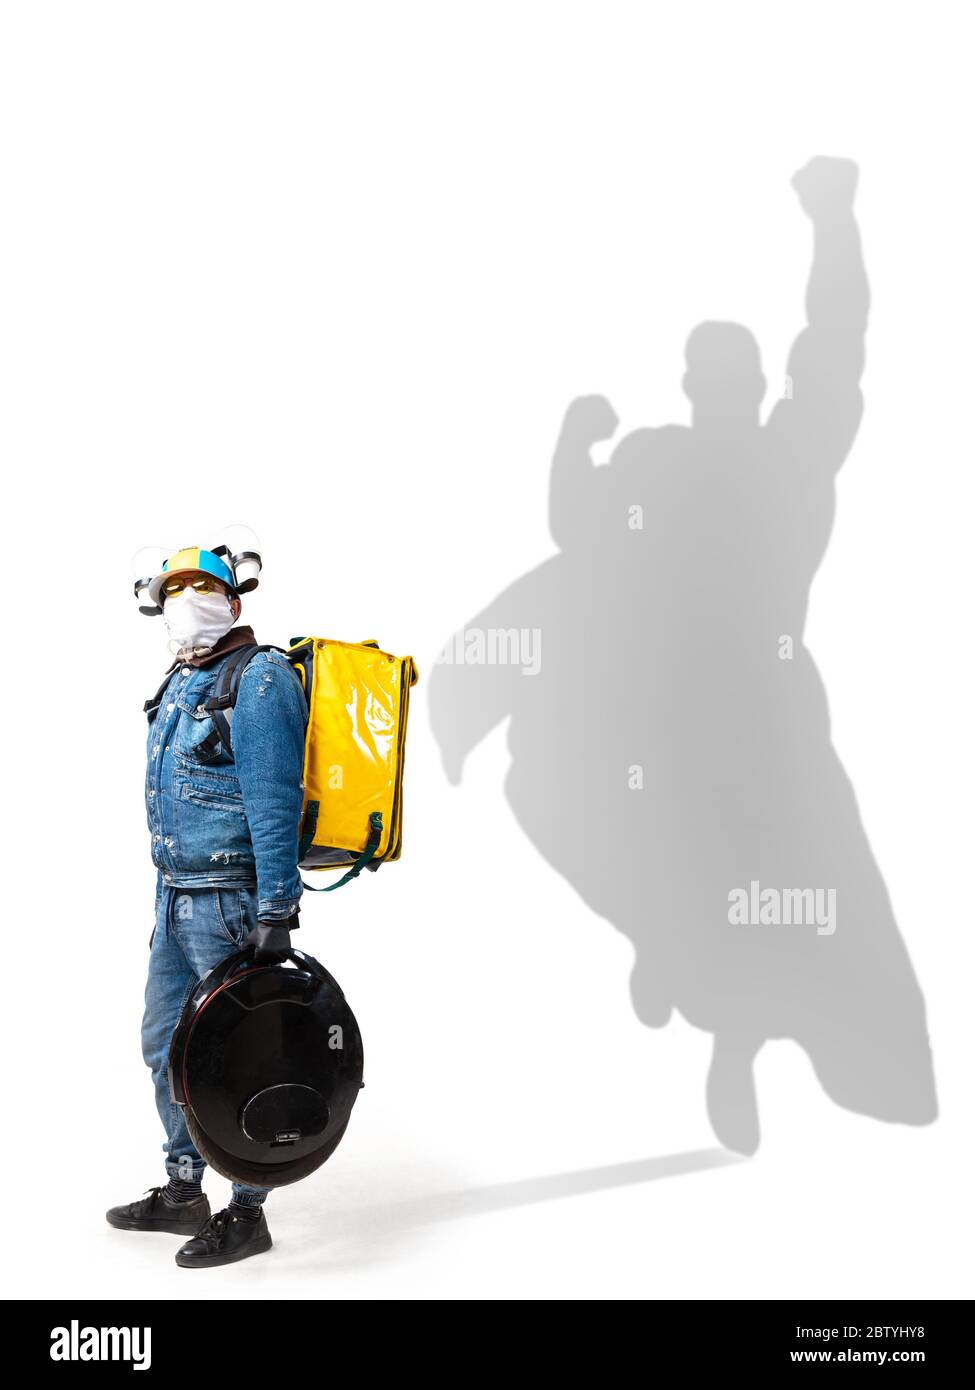 Superhero in shadow of ordinary people - modern superhero's concept, respect and admiration. Deliveryman keeping work despite infection risk during pandemic, setting good example. Inspiring others. Stock Photo